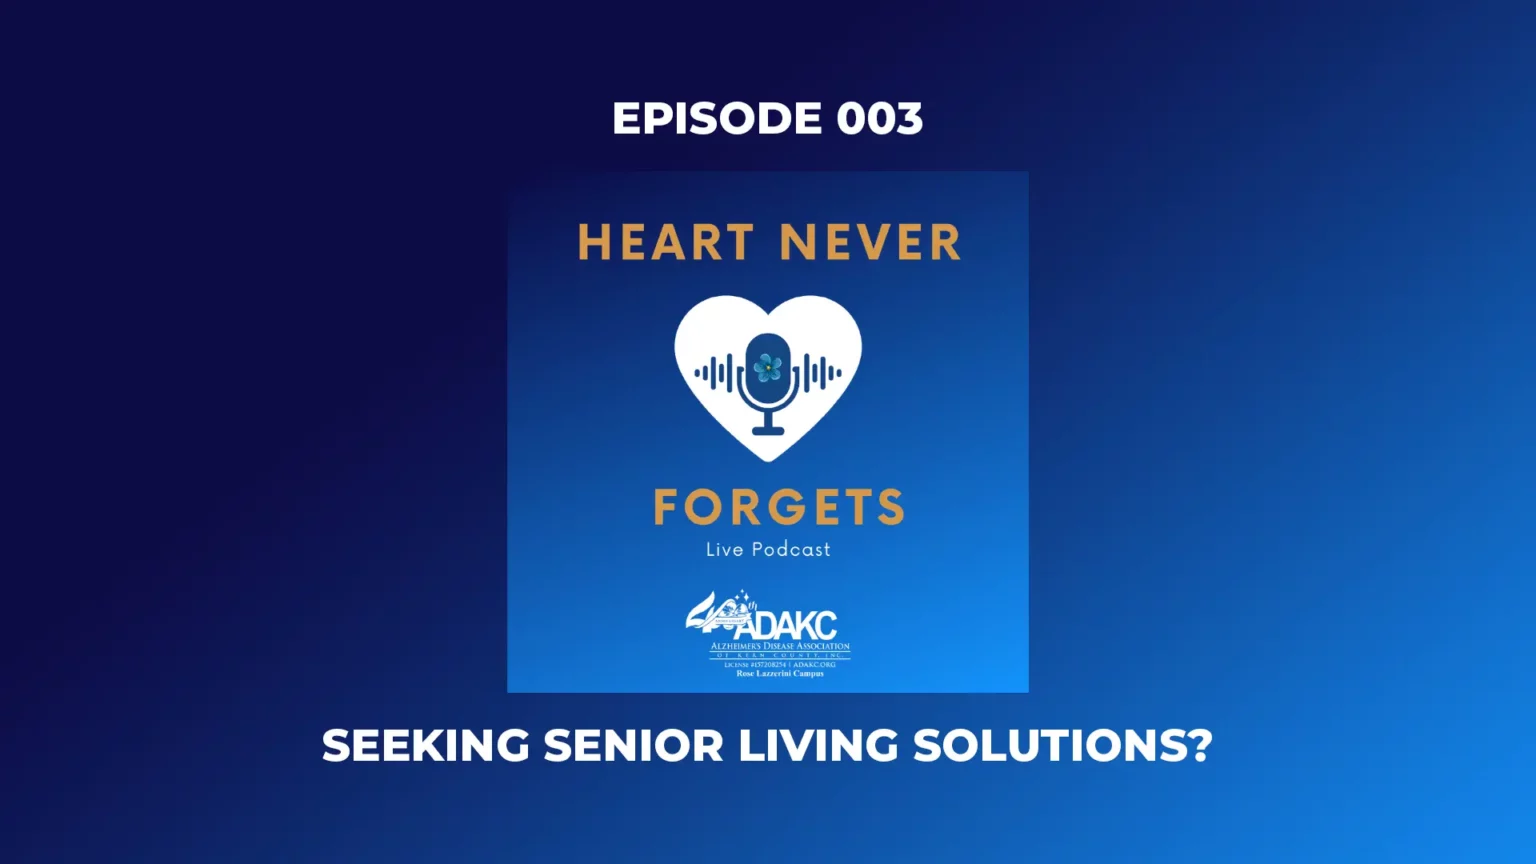 The Heart Never Forgets Podcast - Episode 003 - Seeking Senior Living Solutions?